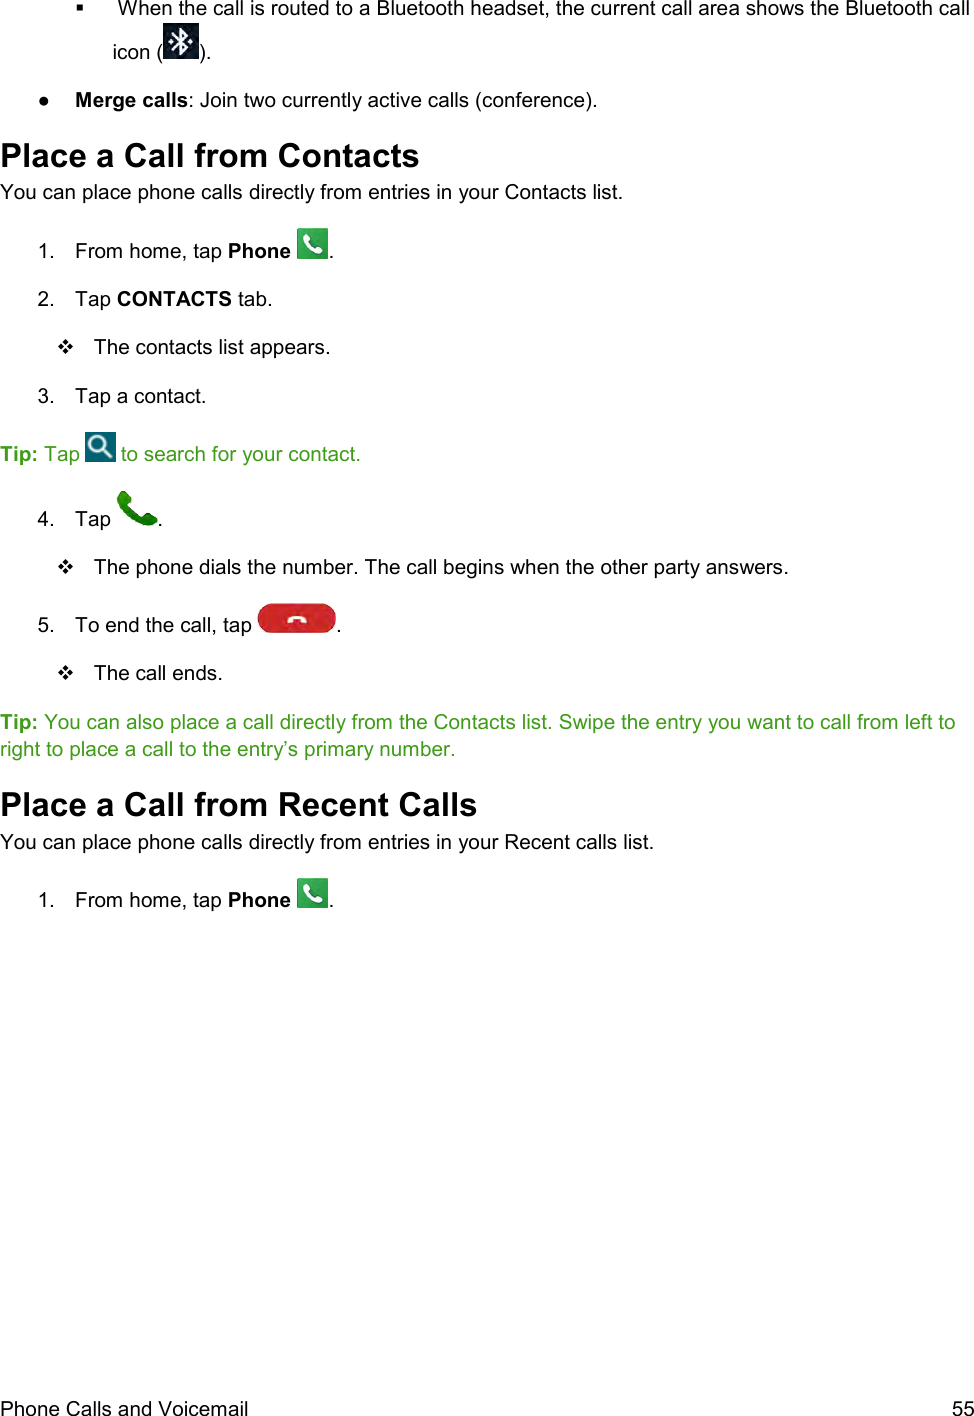  Phone Calls and Voicemail  55    When the call is routed to a Bluetooth headset, the current call area shows the Bluetooth call icon ( ). ●  Merge calls: Join two currently active calls (conference). Place a Call from Contacts You can place phone calls directly from entries in your Contacts list. 1.  From home, tap Phone  . 2.  Tap CONTACTS tab.   The contacts list appears. 3.  Tap a contact.  Tip: Tap   to search for your contact. 4.  Tap  .   The phone dials the number. The call begins when the other party answers. 5.  To end the call, tap  .    The call ends. Tip: You can also place a call directly from the Contacts list. Swipe the entry you want to call from left to right to place a call to the entry’s primary number. Place a Call from Recent Calls You can place phone calls directly from entries in your Recent calls list. 1.  From home, tap Phone  . 